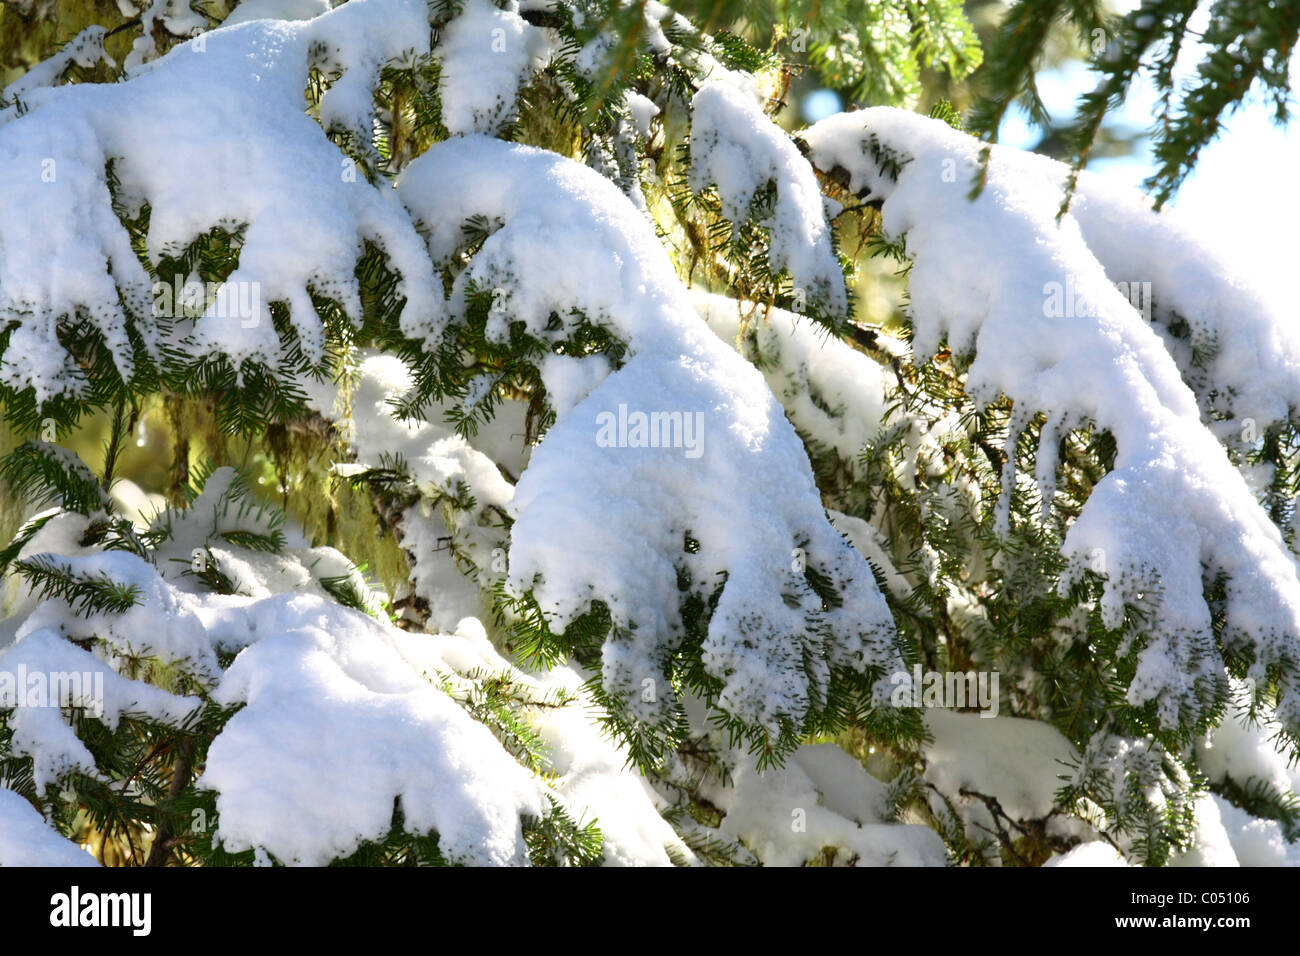 Snow covered pine tree branches and needles.  Christmas tree. Stock Photo